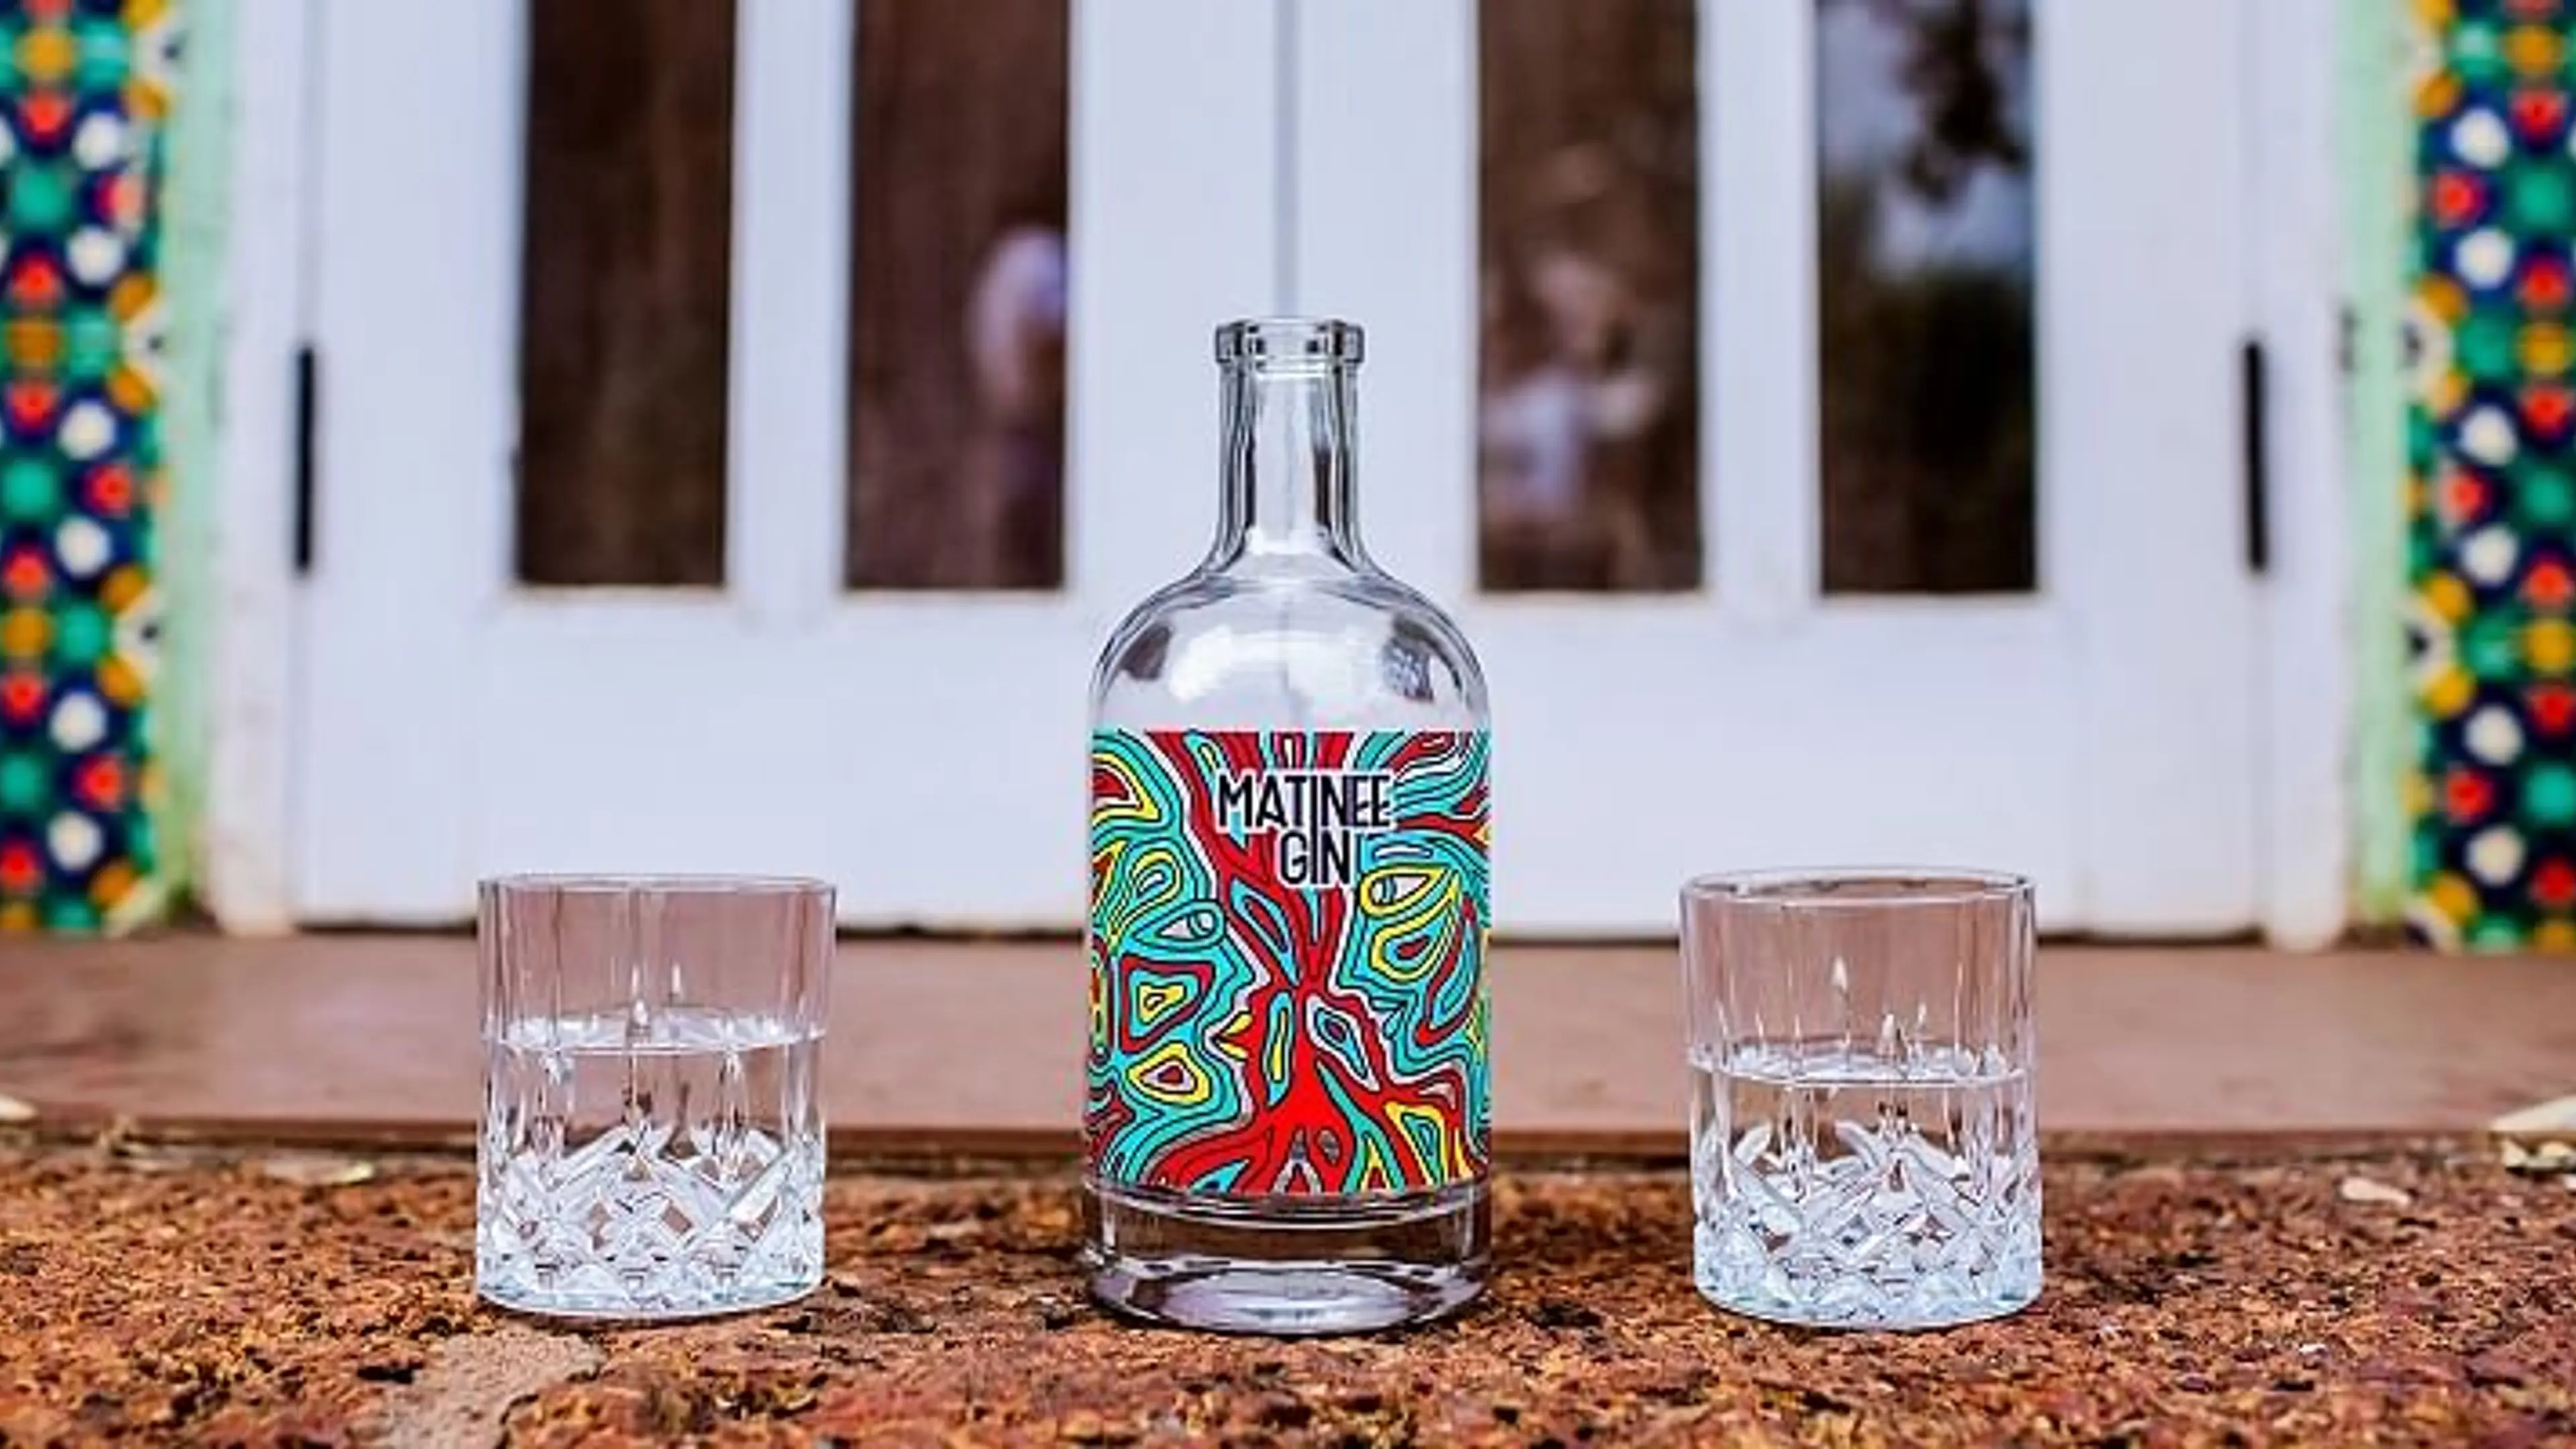 A splash of desi spirit and nostalgia: How Matinee Gin is hitting the right notes